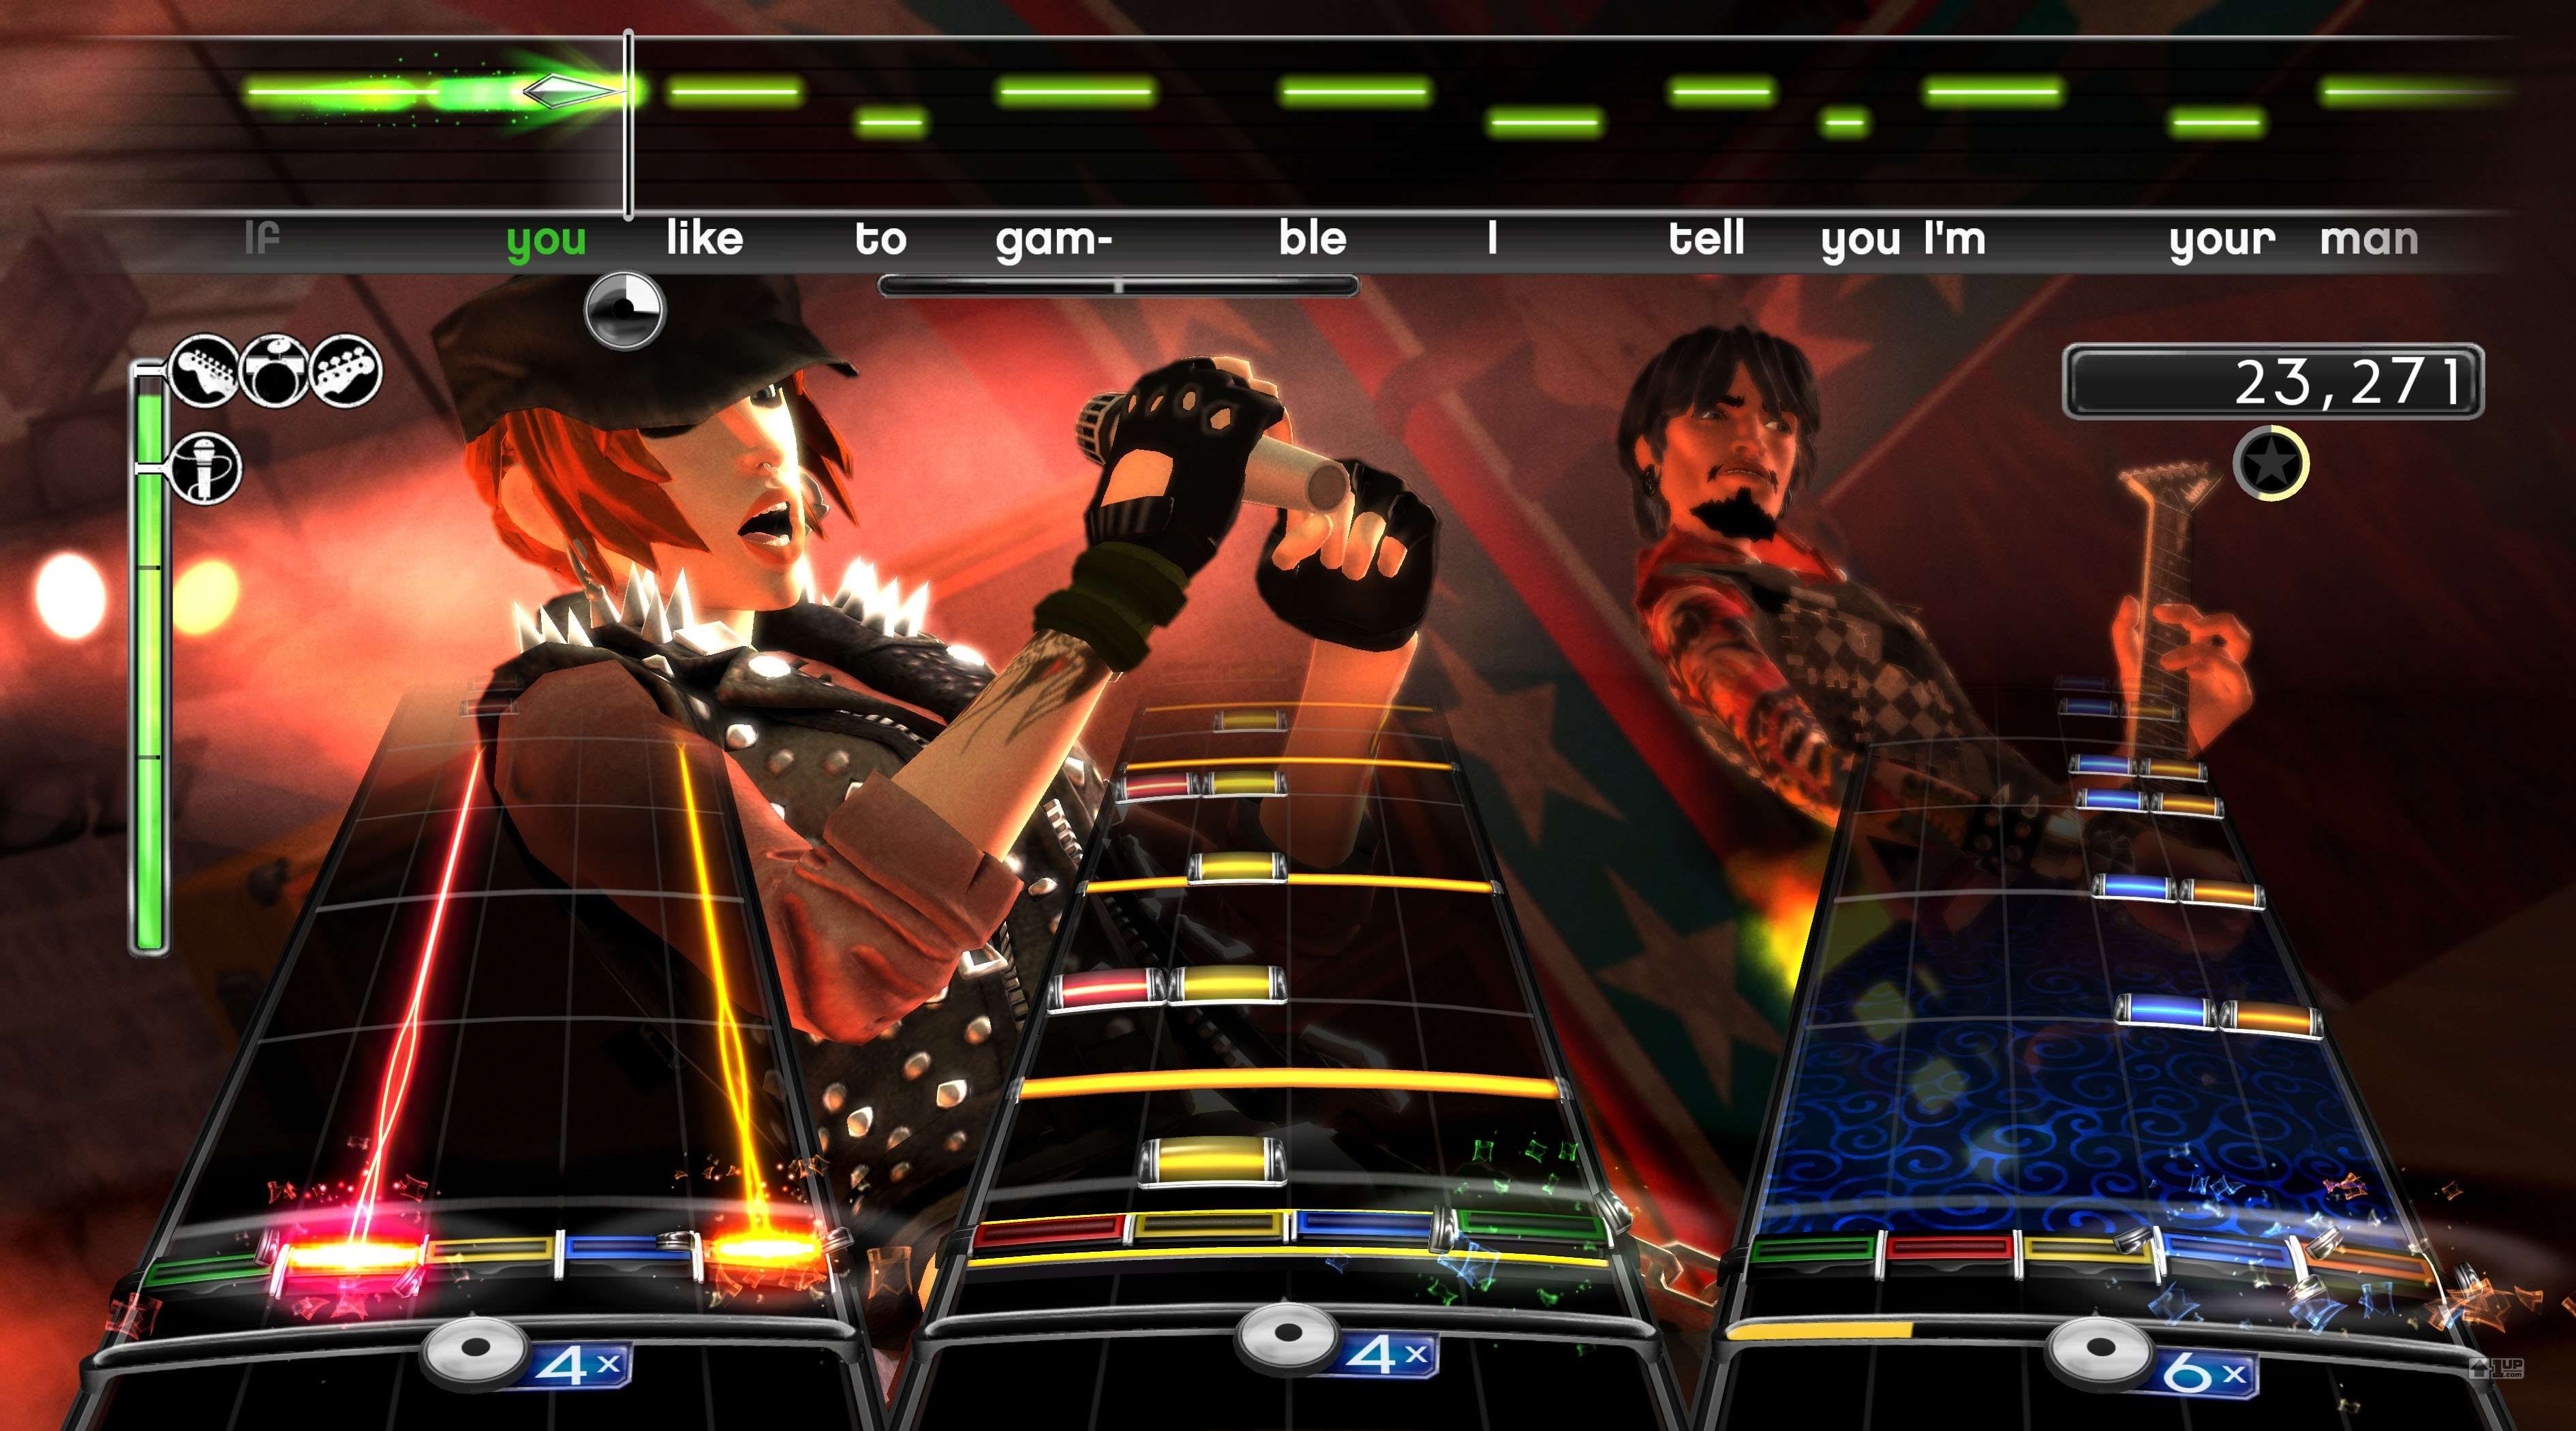 Sample level in Rock Band